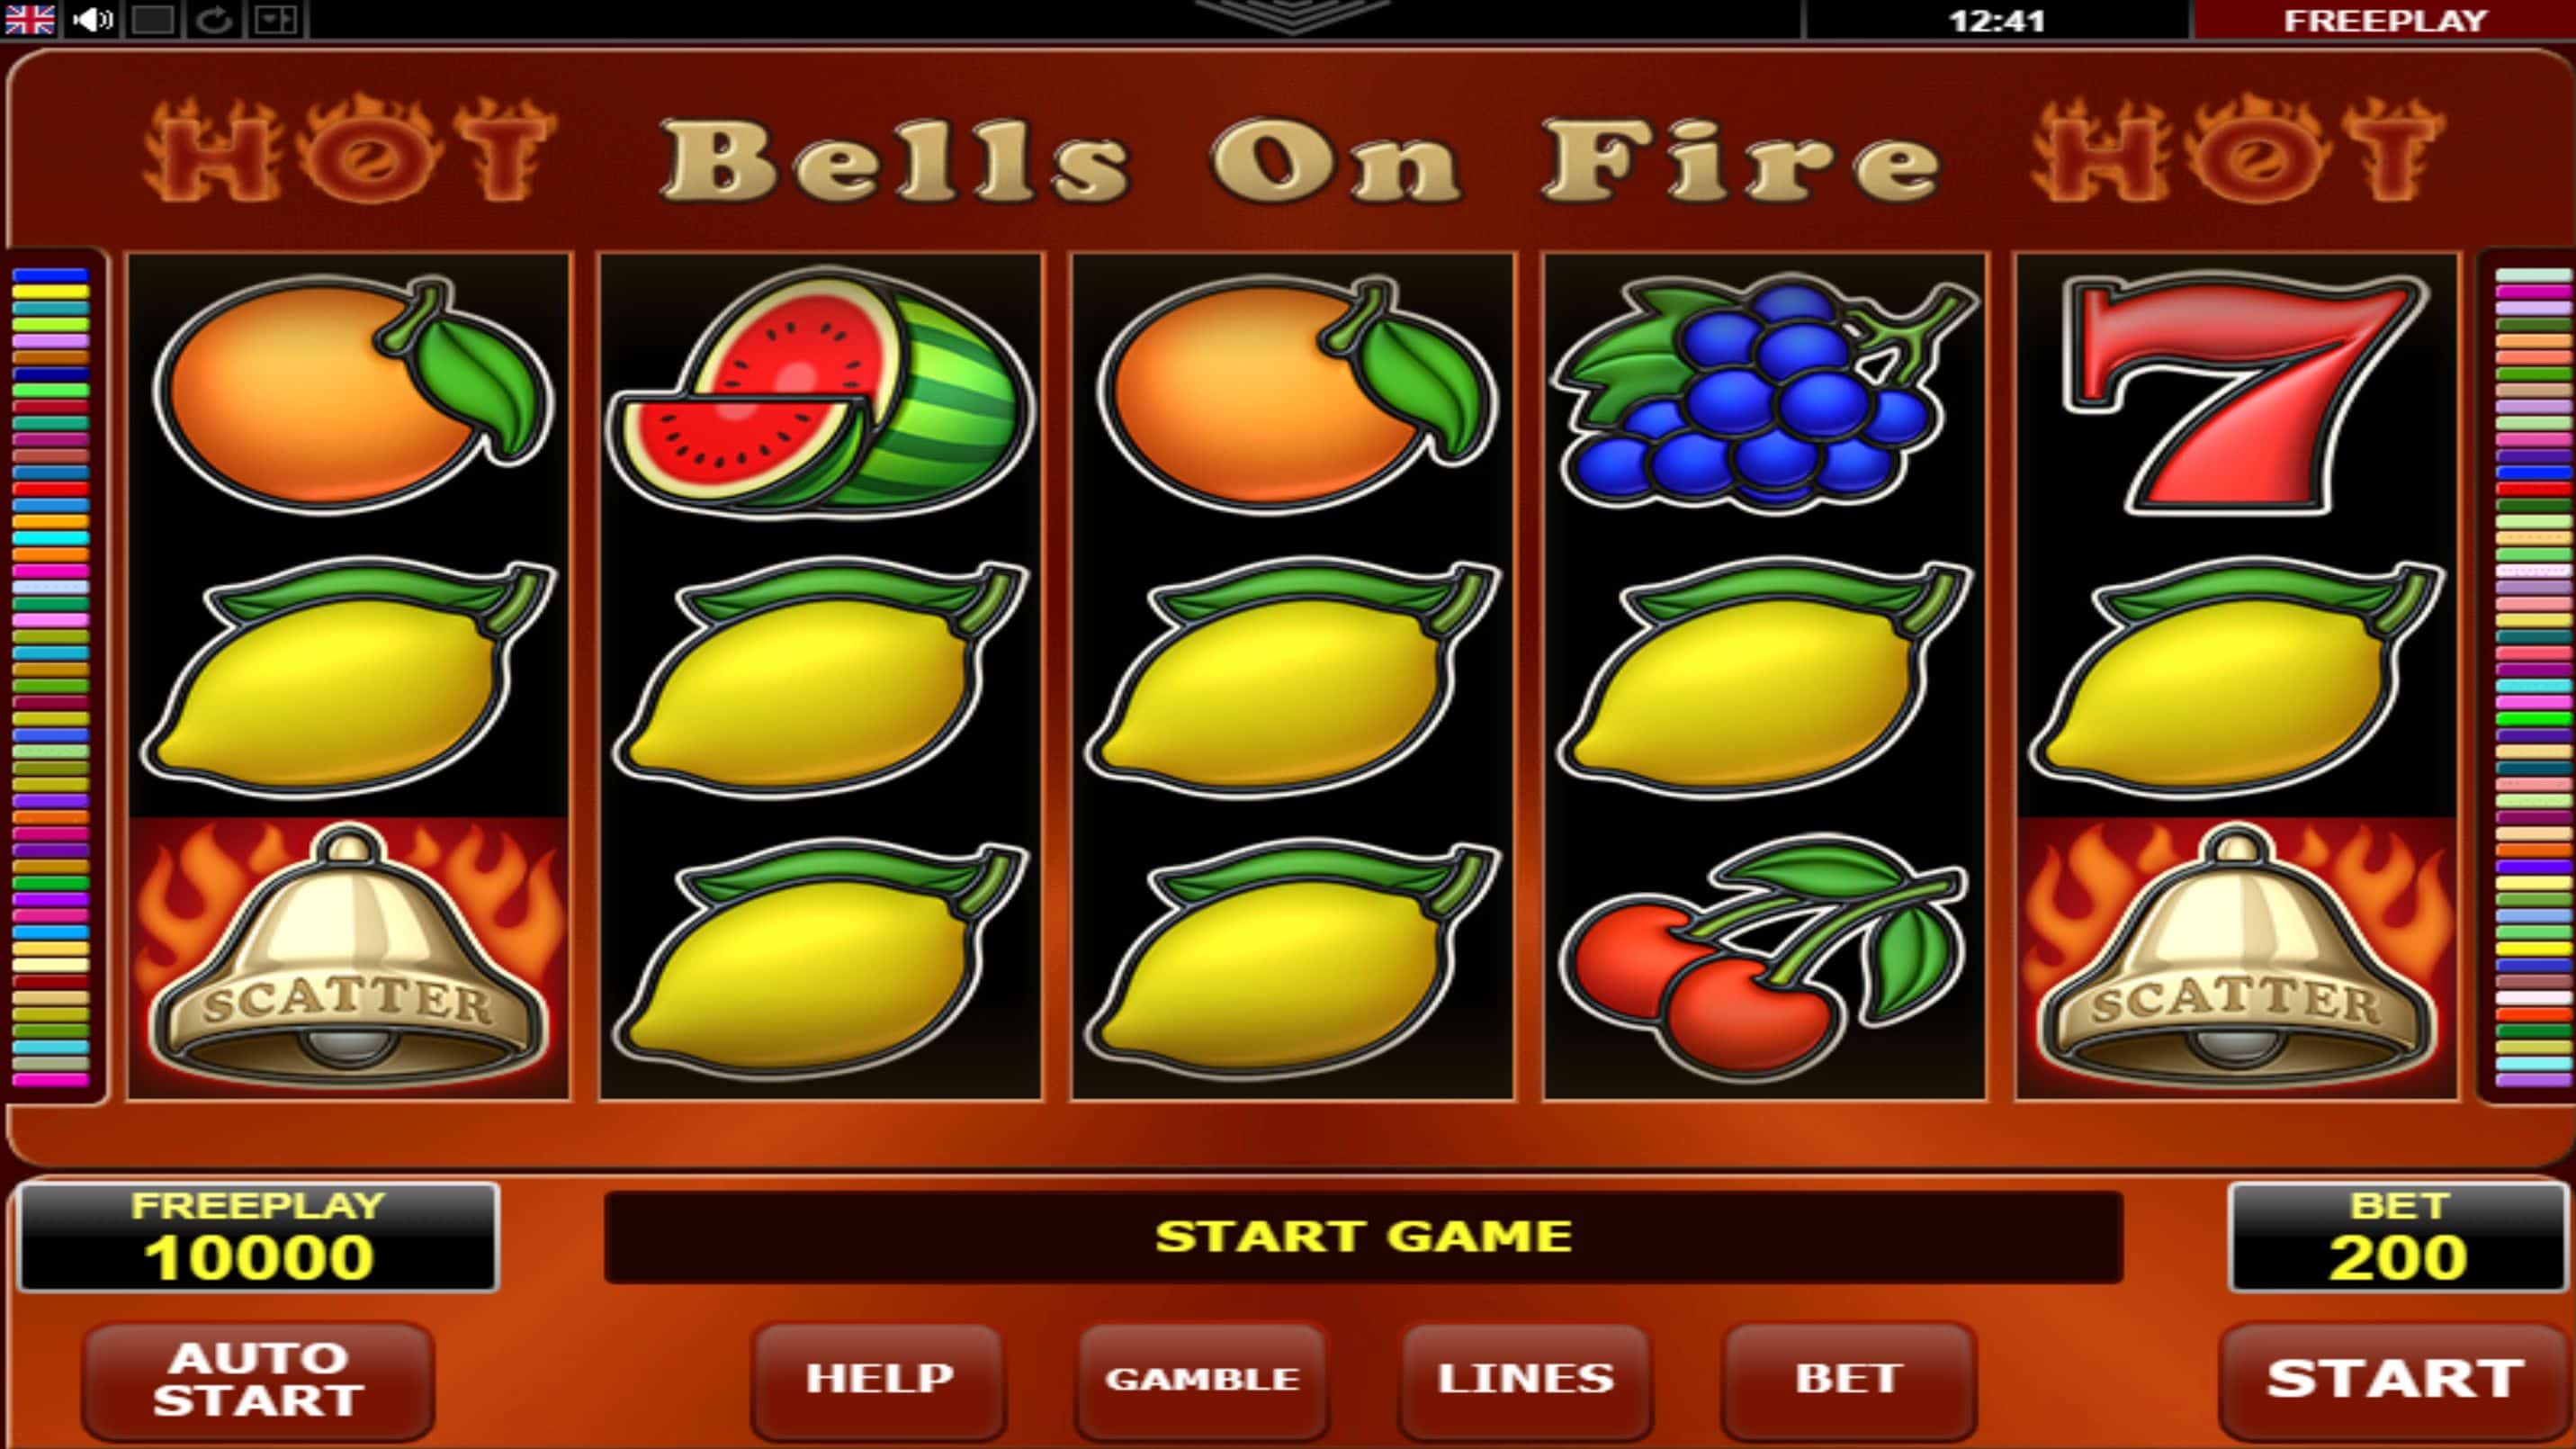 Bells on Fire Hot Slot Game Free Play at Casino Ireland 01